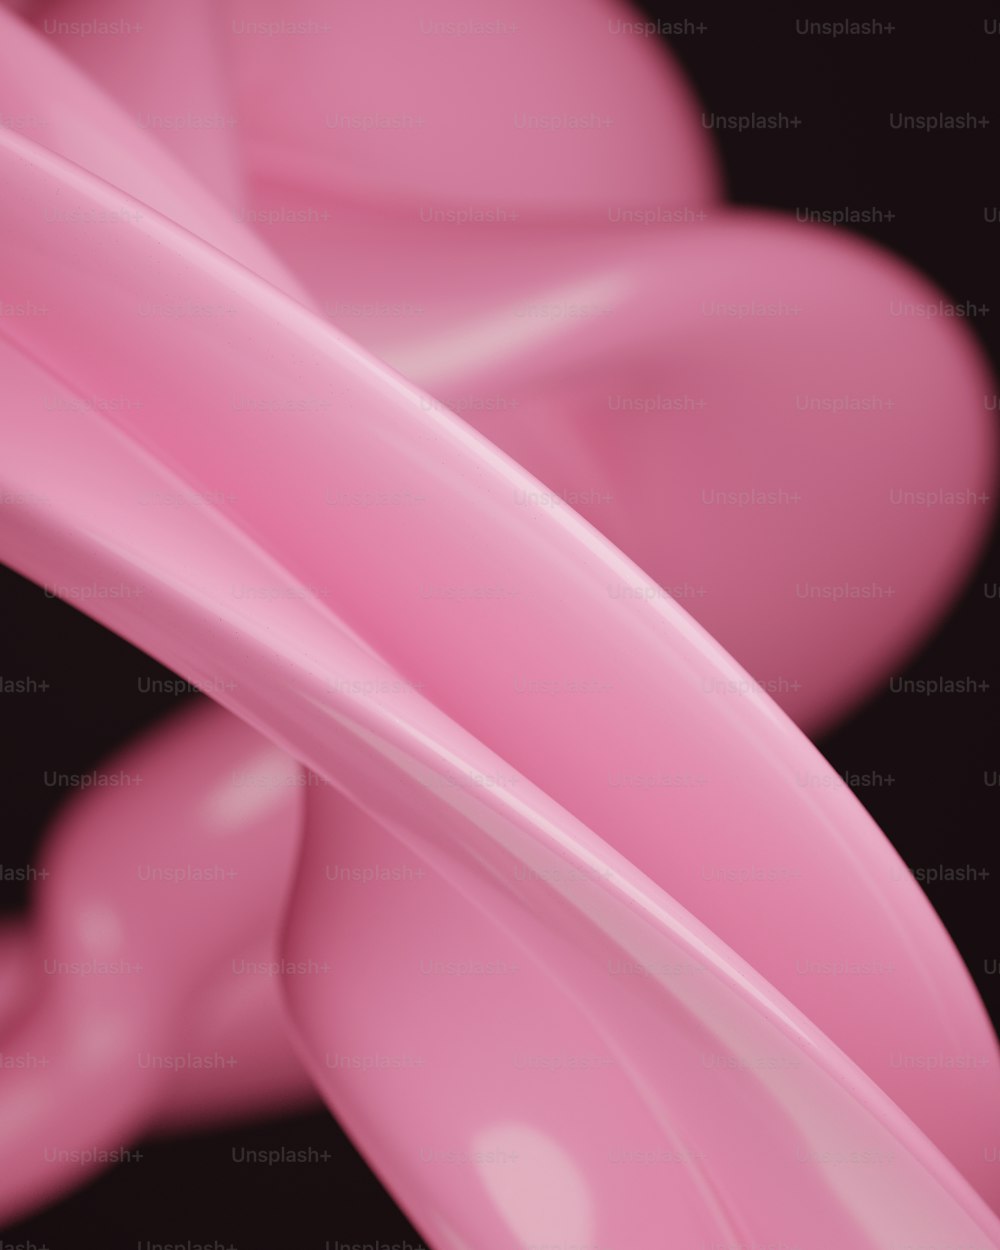 a close up of a pink object on a black background